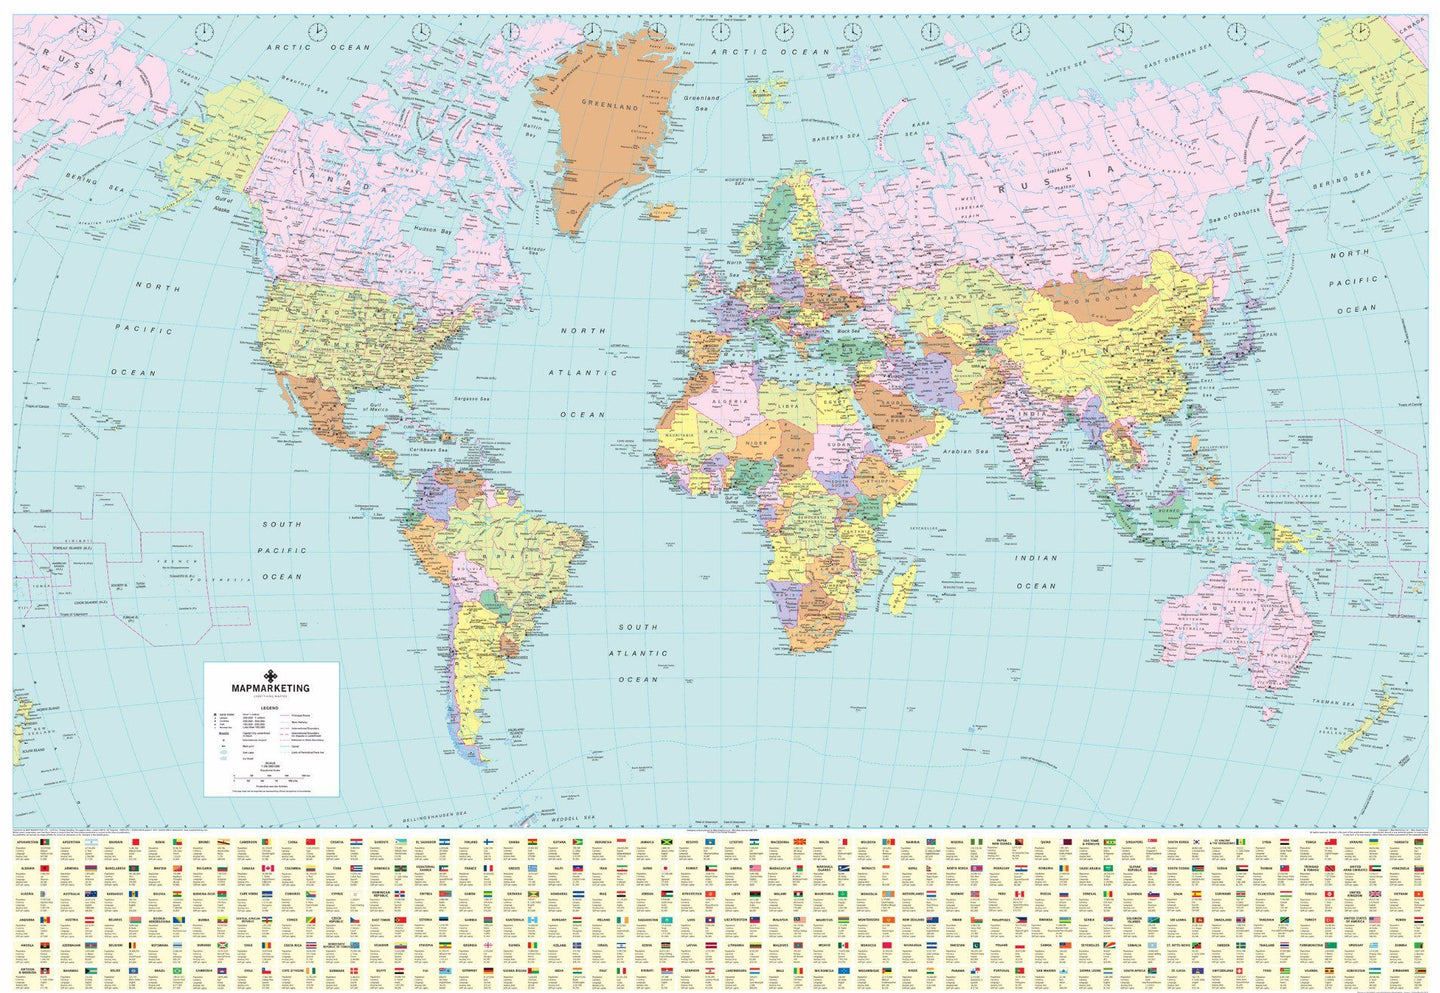 The World Political Map